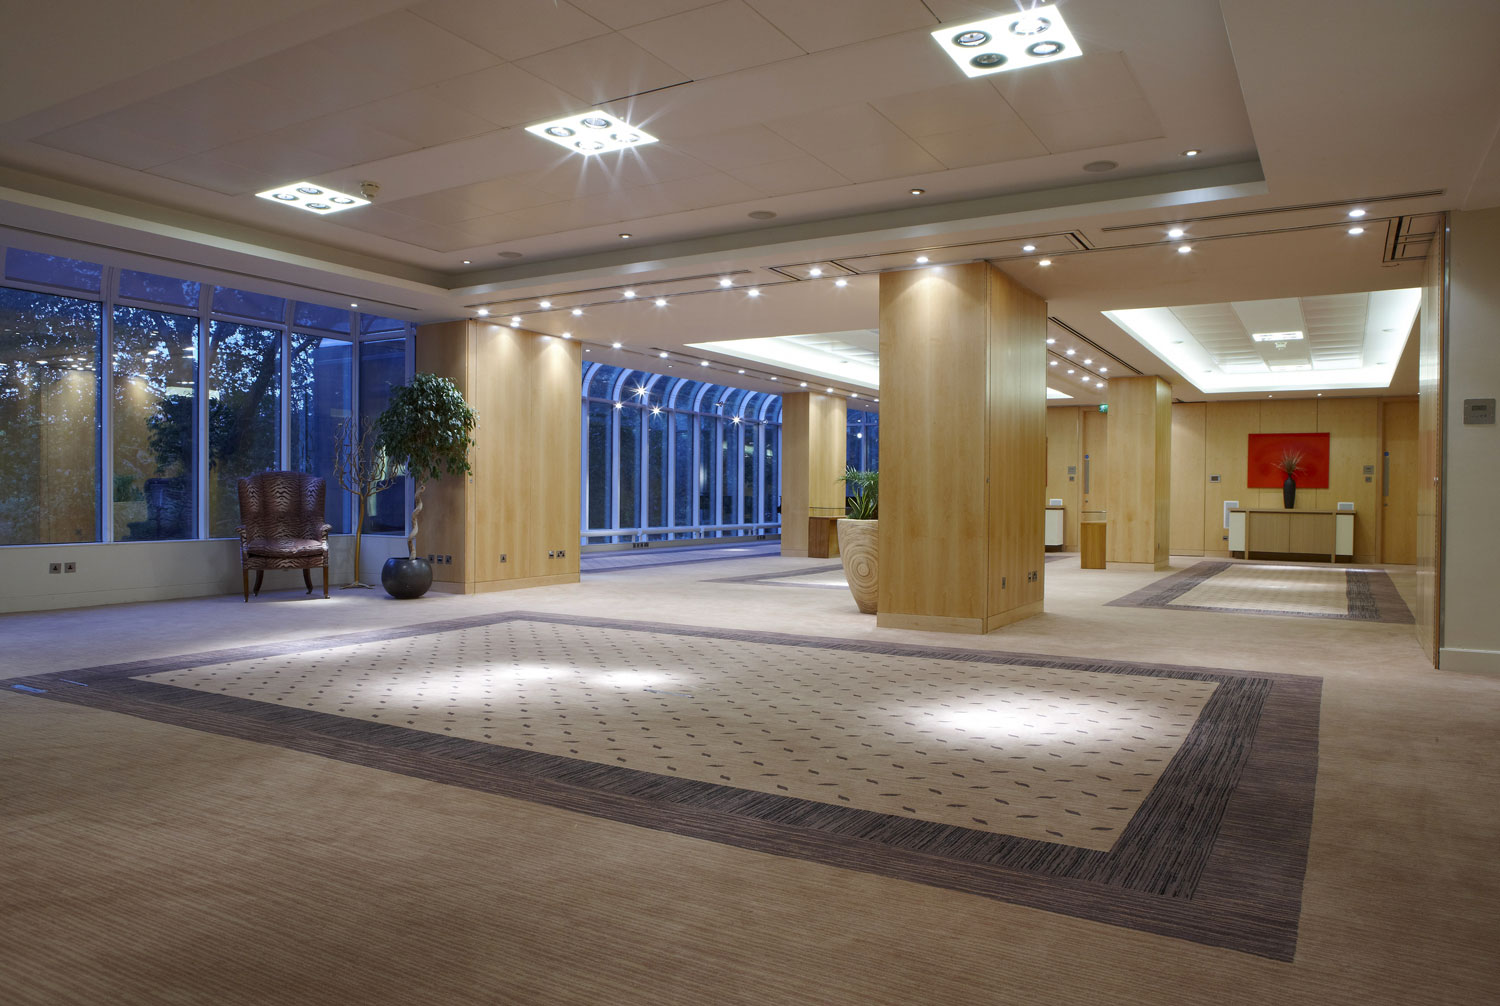 Jumeirah Carlton Tower Hotel, London Banqueting Suite | Commercial Hotel Photographer